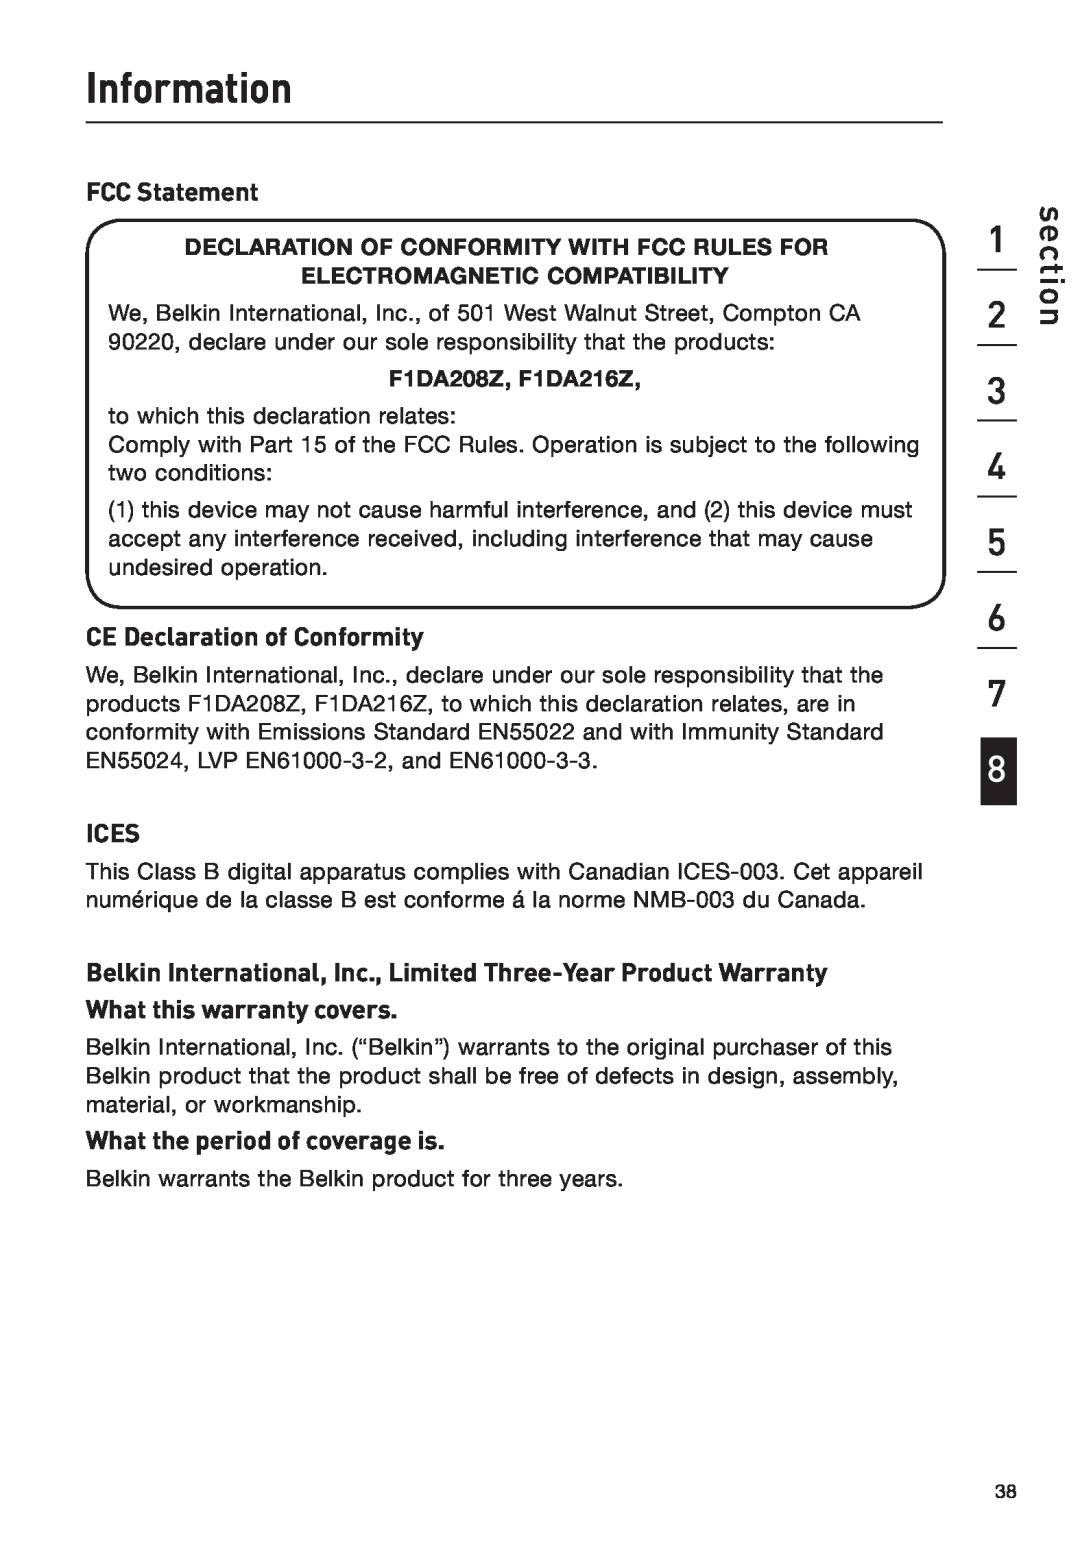 Belkin F1DA208Z Information, FCC Statement, CE Declaration of Conformity, Ices, What the period of coverage is, section 